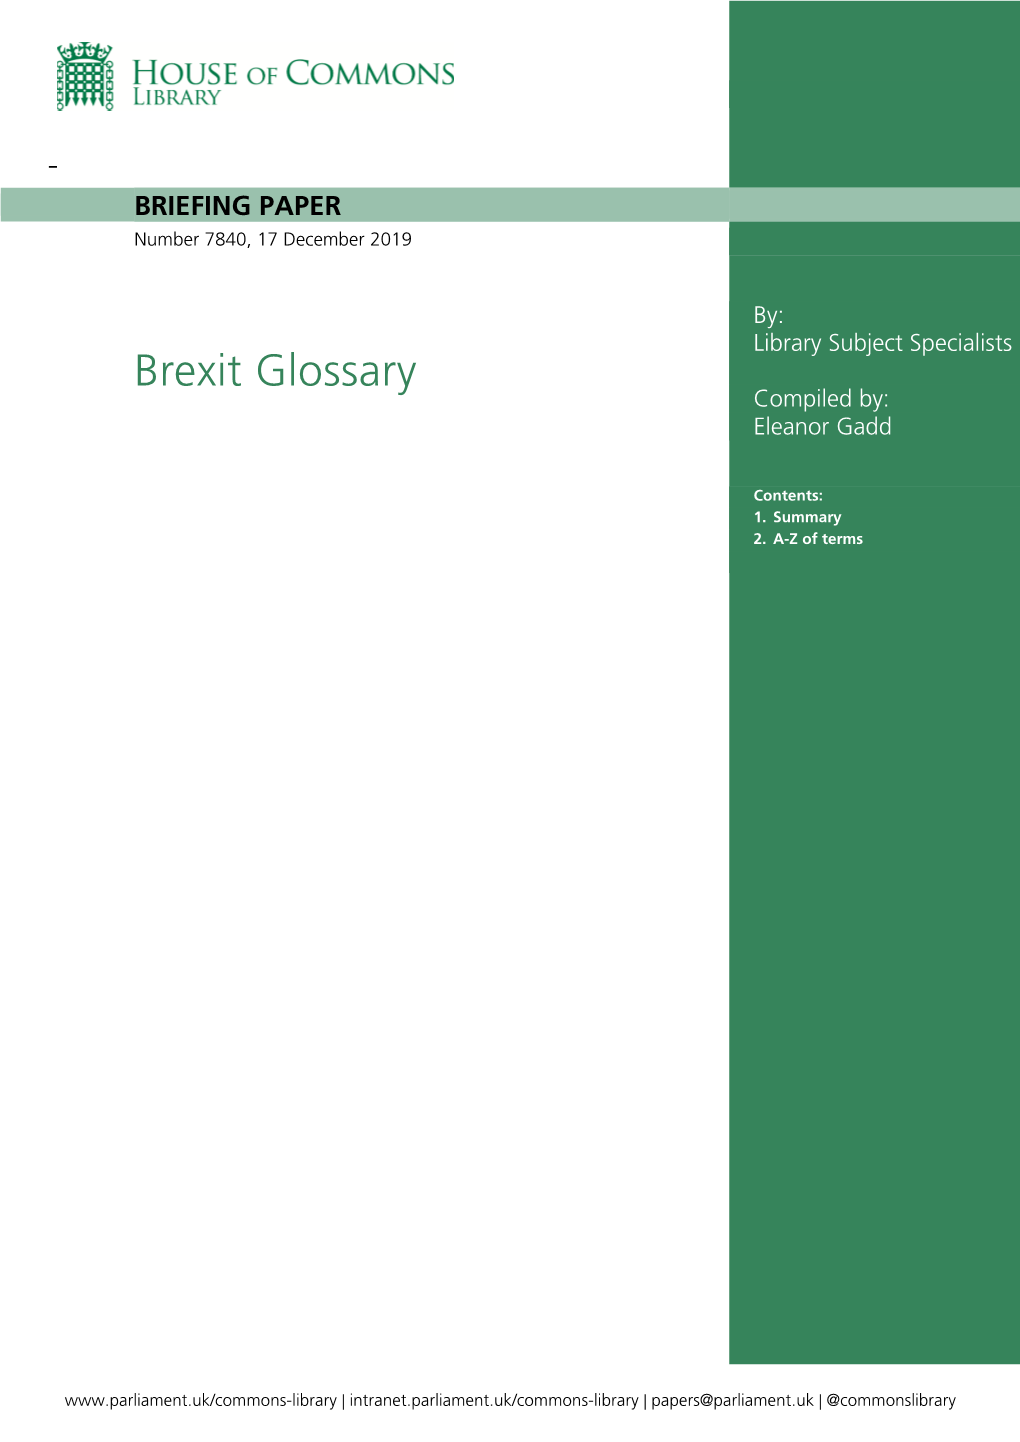 Brexit Glossary Compiled By: Eleanor Gadd